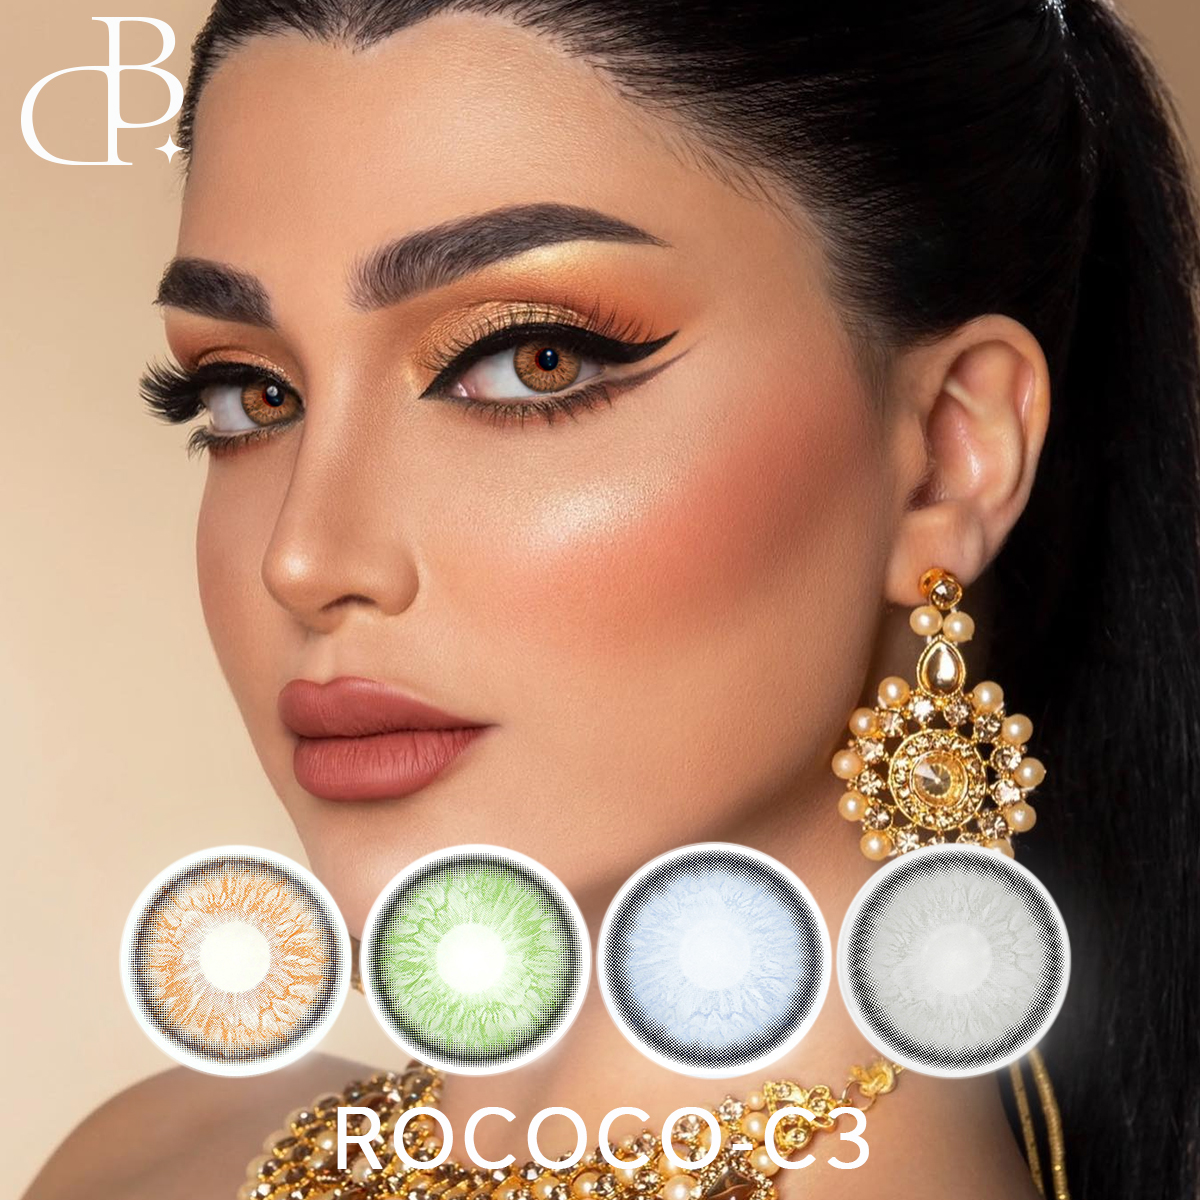 https://www.dblenses.com/rococo-3-new- looking-cosmetic-wholesale-color-contact-lens-cheap-soft-yearly-eye-color-contact-lenses-product/